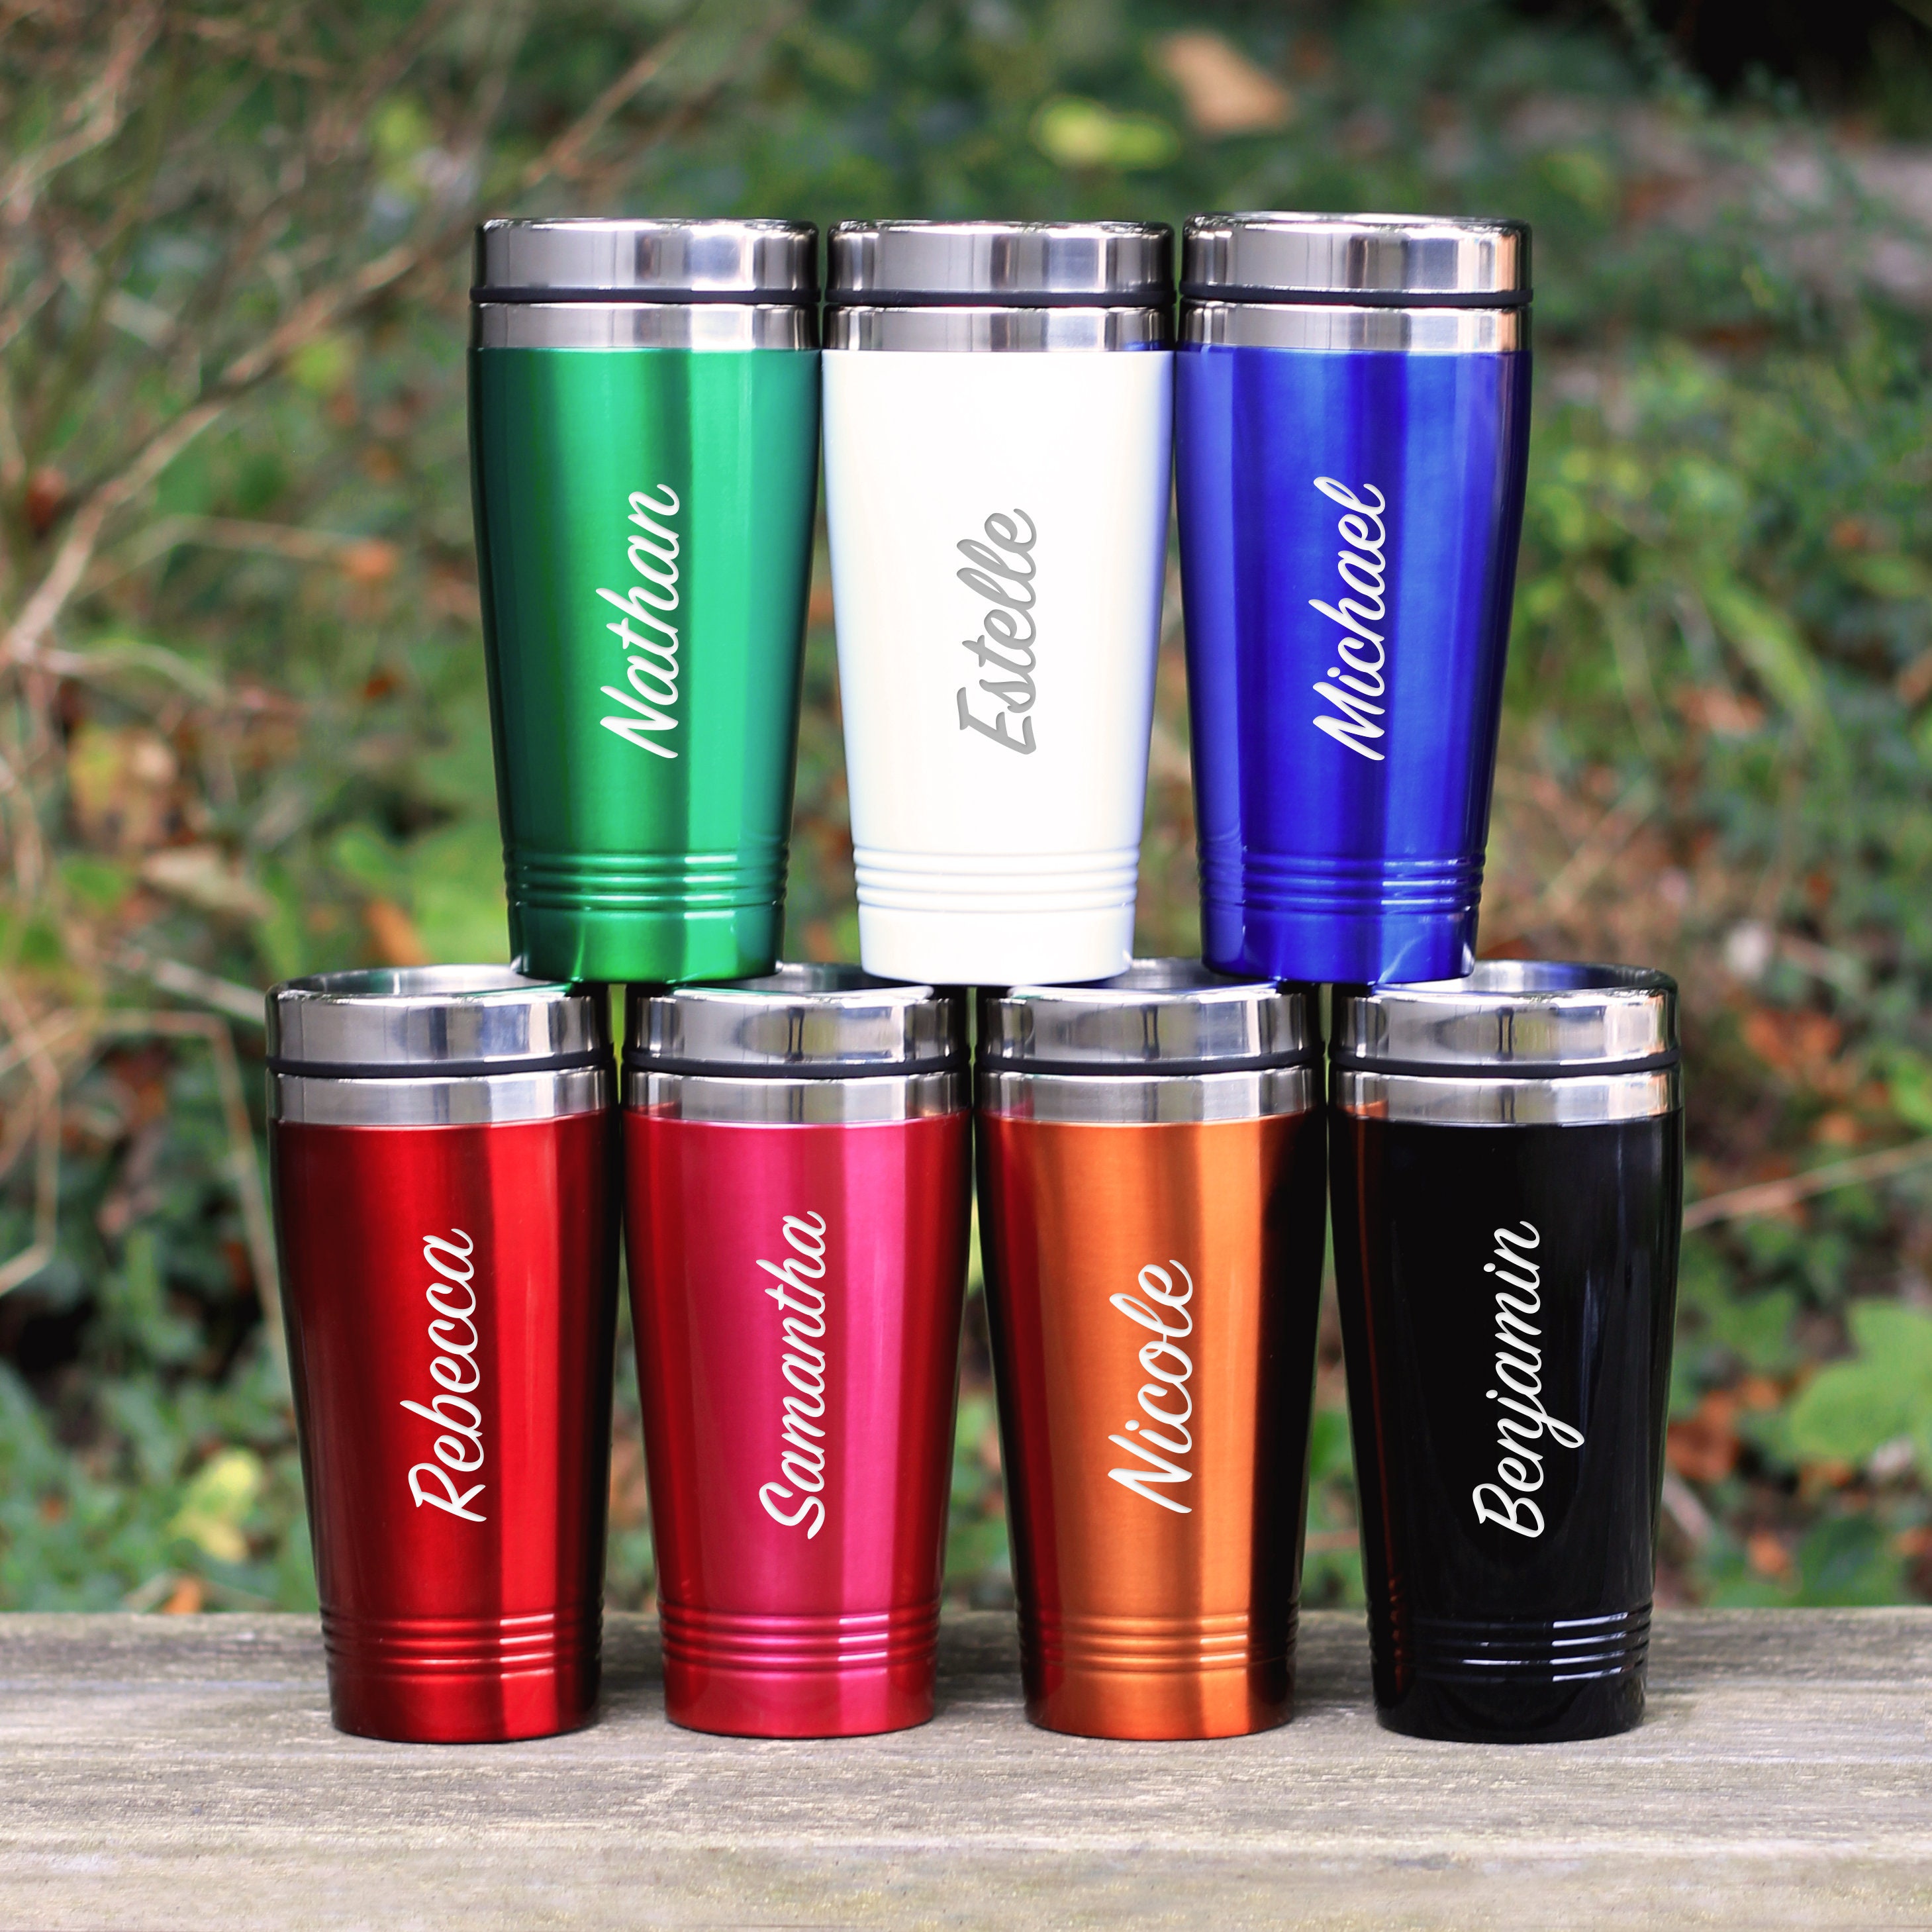 Buy Personalised Travel Hot & Cold Mug, Reusable Coffee Cup